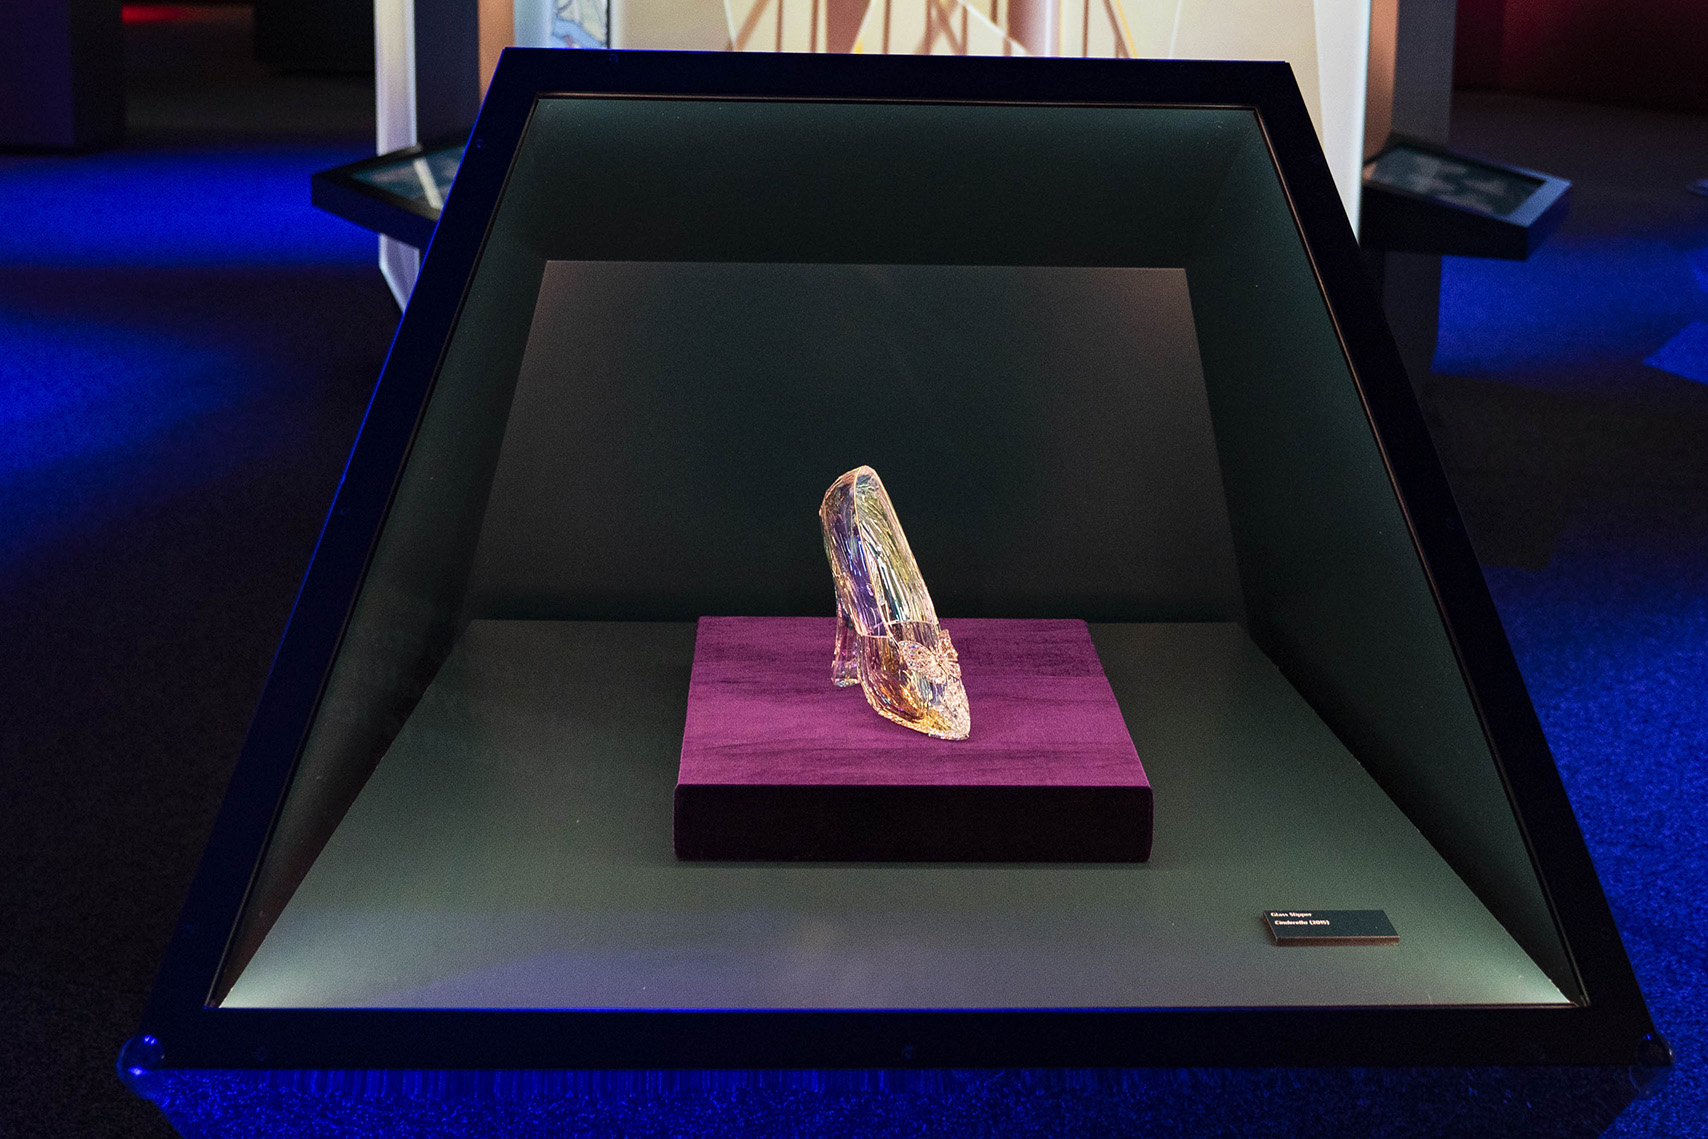 Glass slipper from the live-action Cinderella (2015) on display at Disney100: The Exhibition, now open at The Franklin Institute in Philadelphia. ©Disney